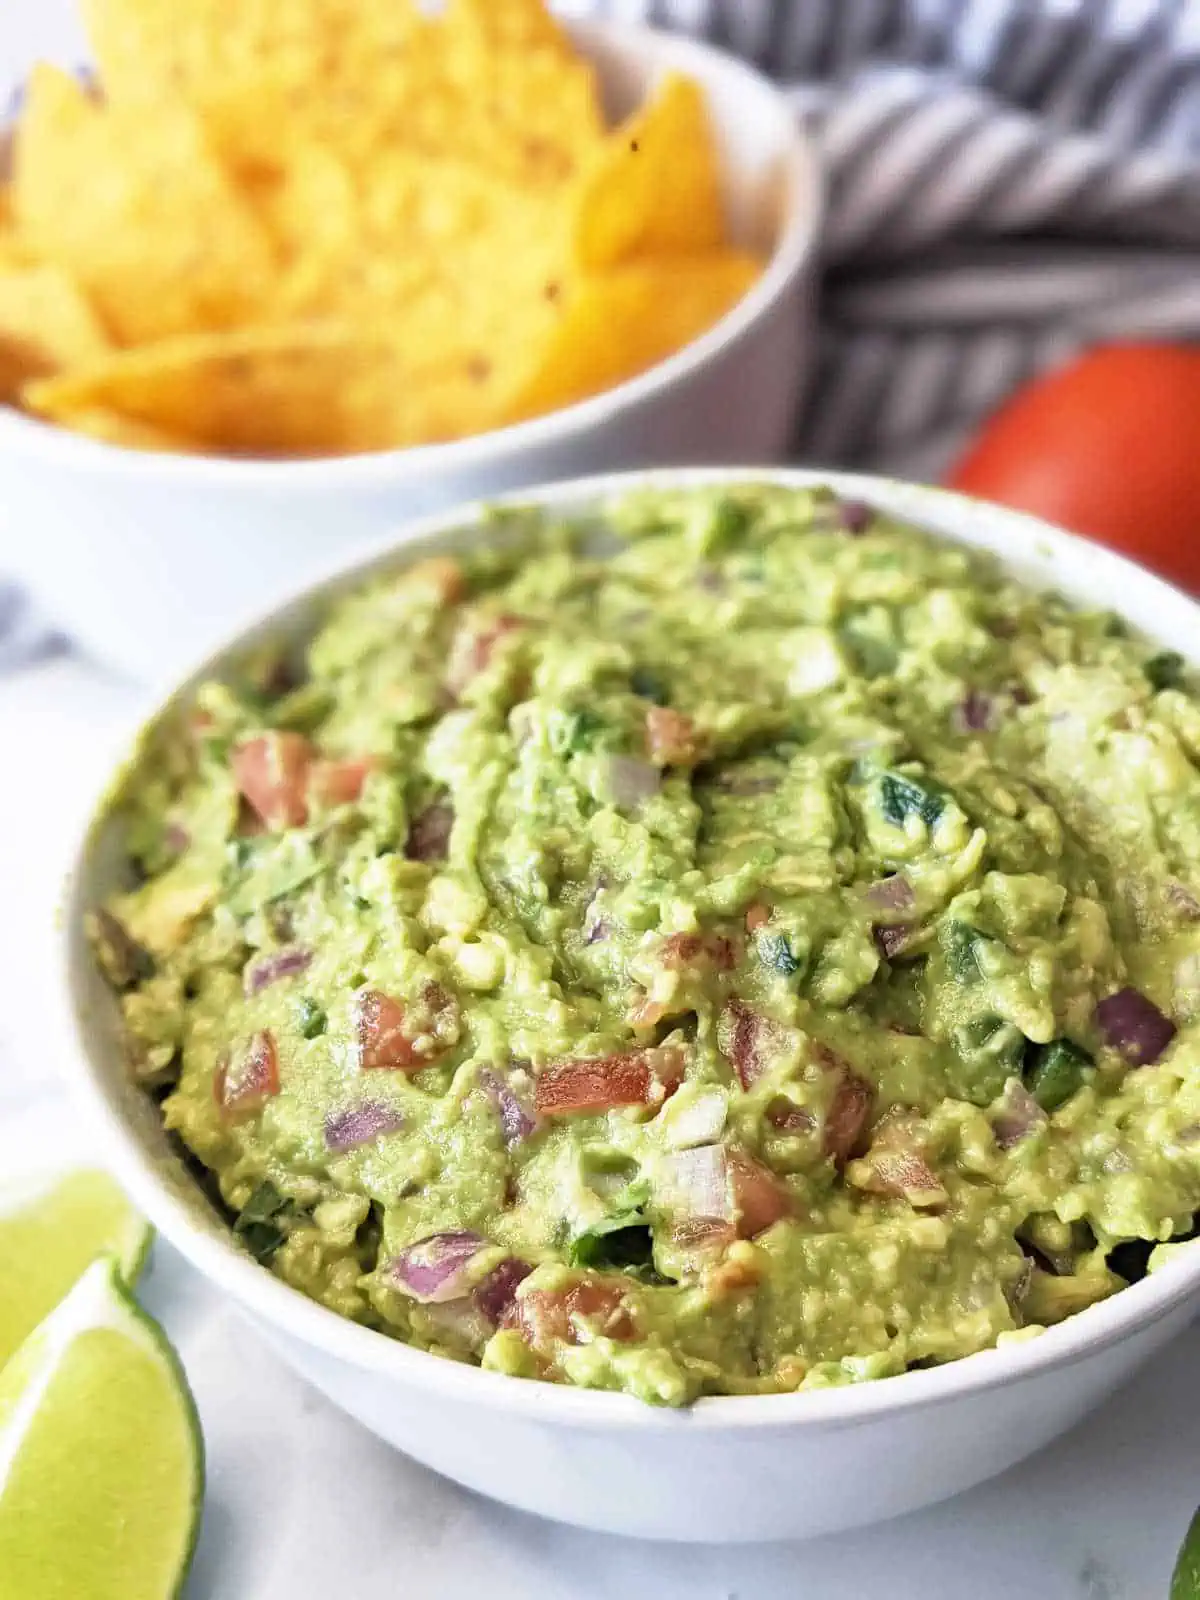 Vegan guacamole in a bowl next to a bowl of tortilla chips.